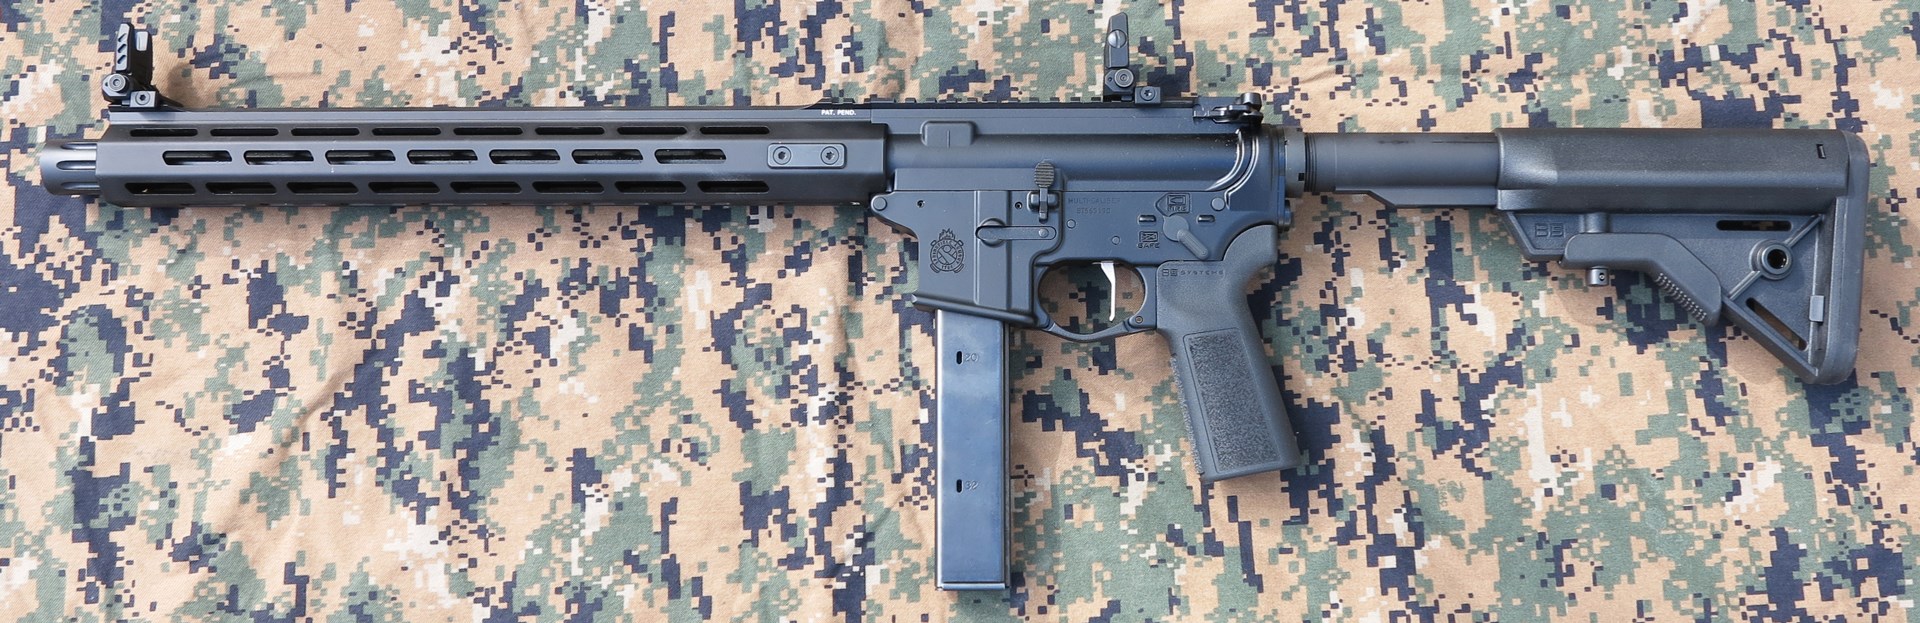 Springfield Armory Saint Victor 9mm Carbine left-side view black ar-15-type semi-automatic rifle 9 mm Luger gun on camouflage material background